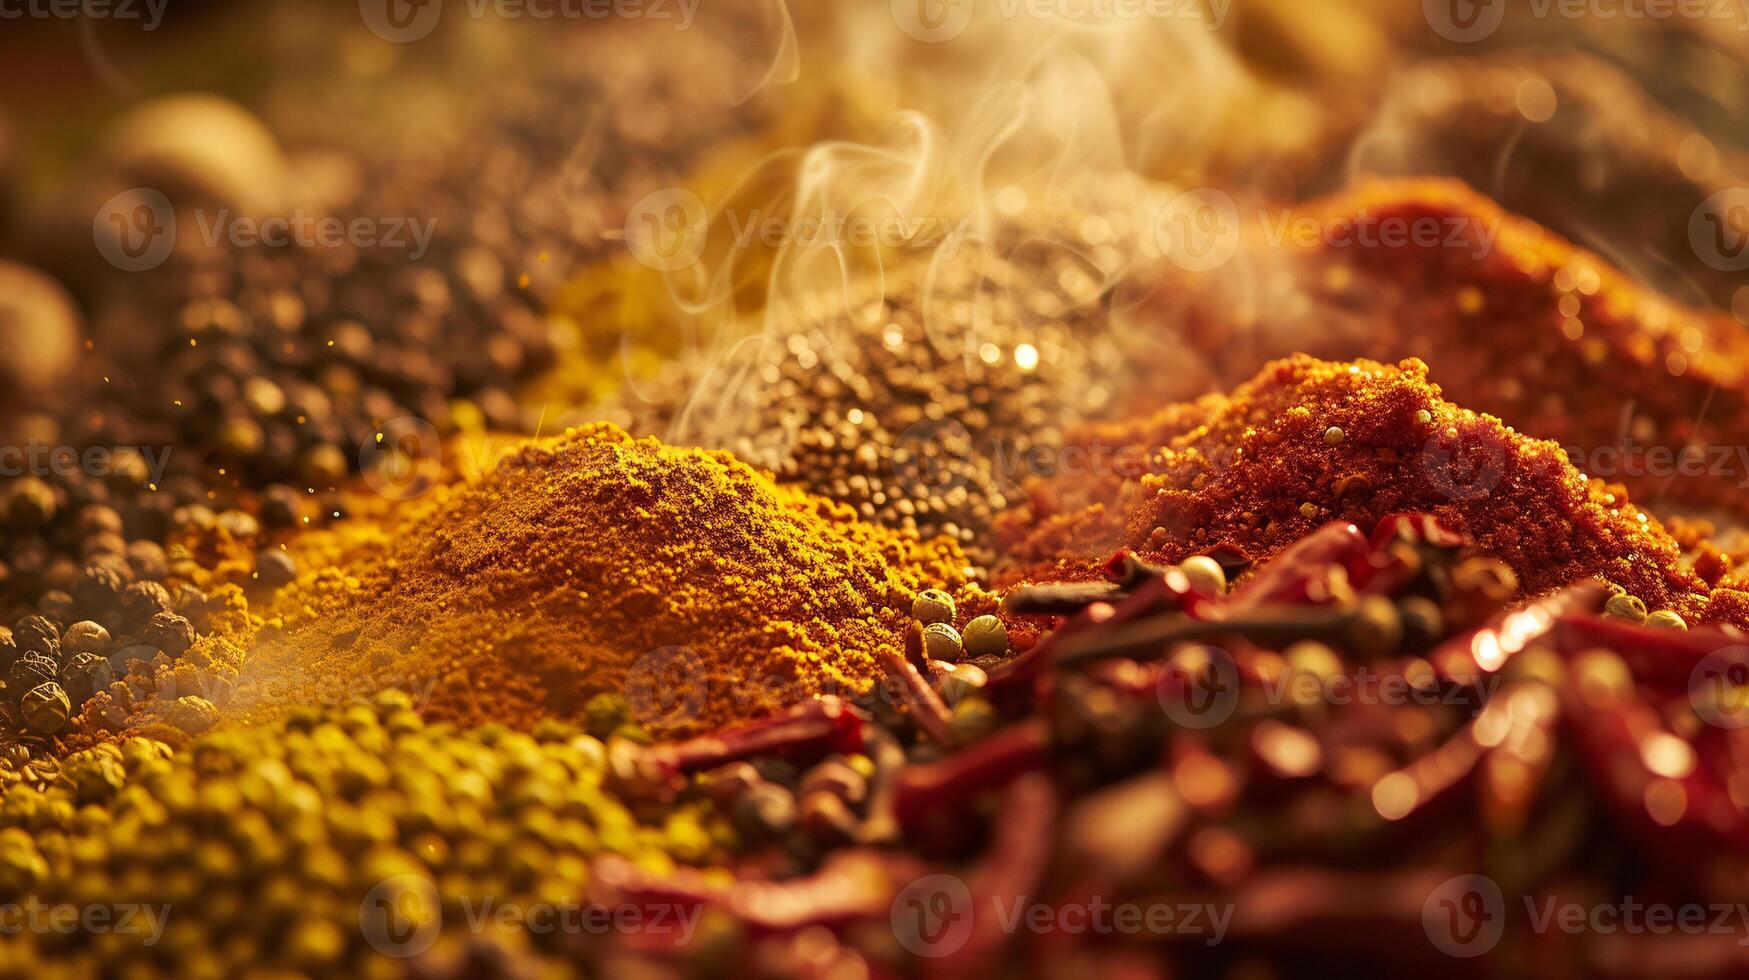 an assortment of whole spices, arranged in harmonious chaos photo